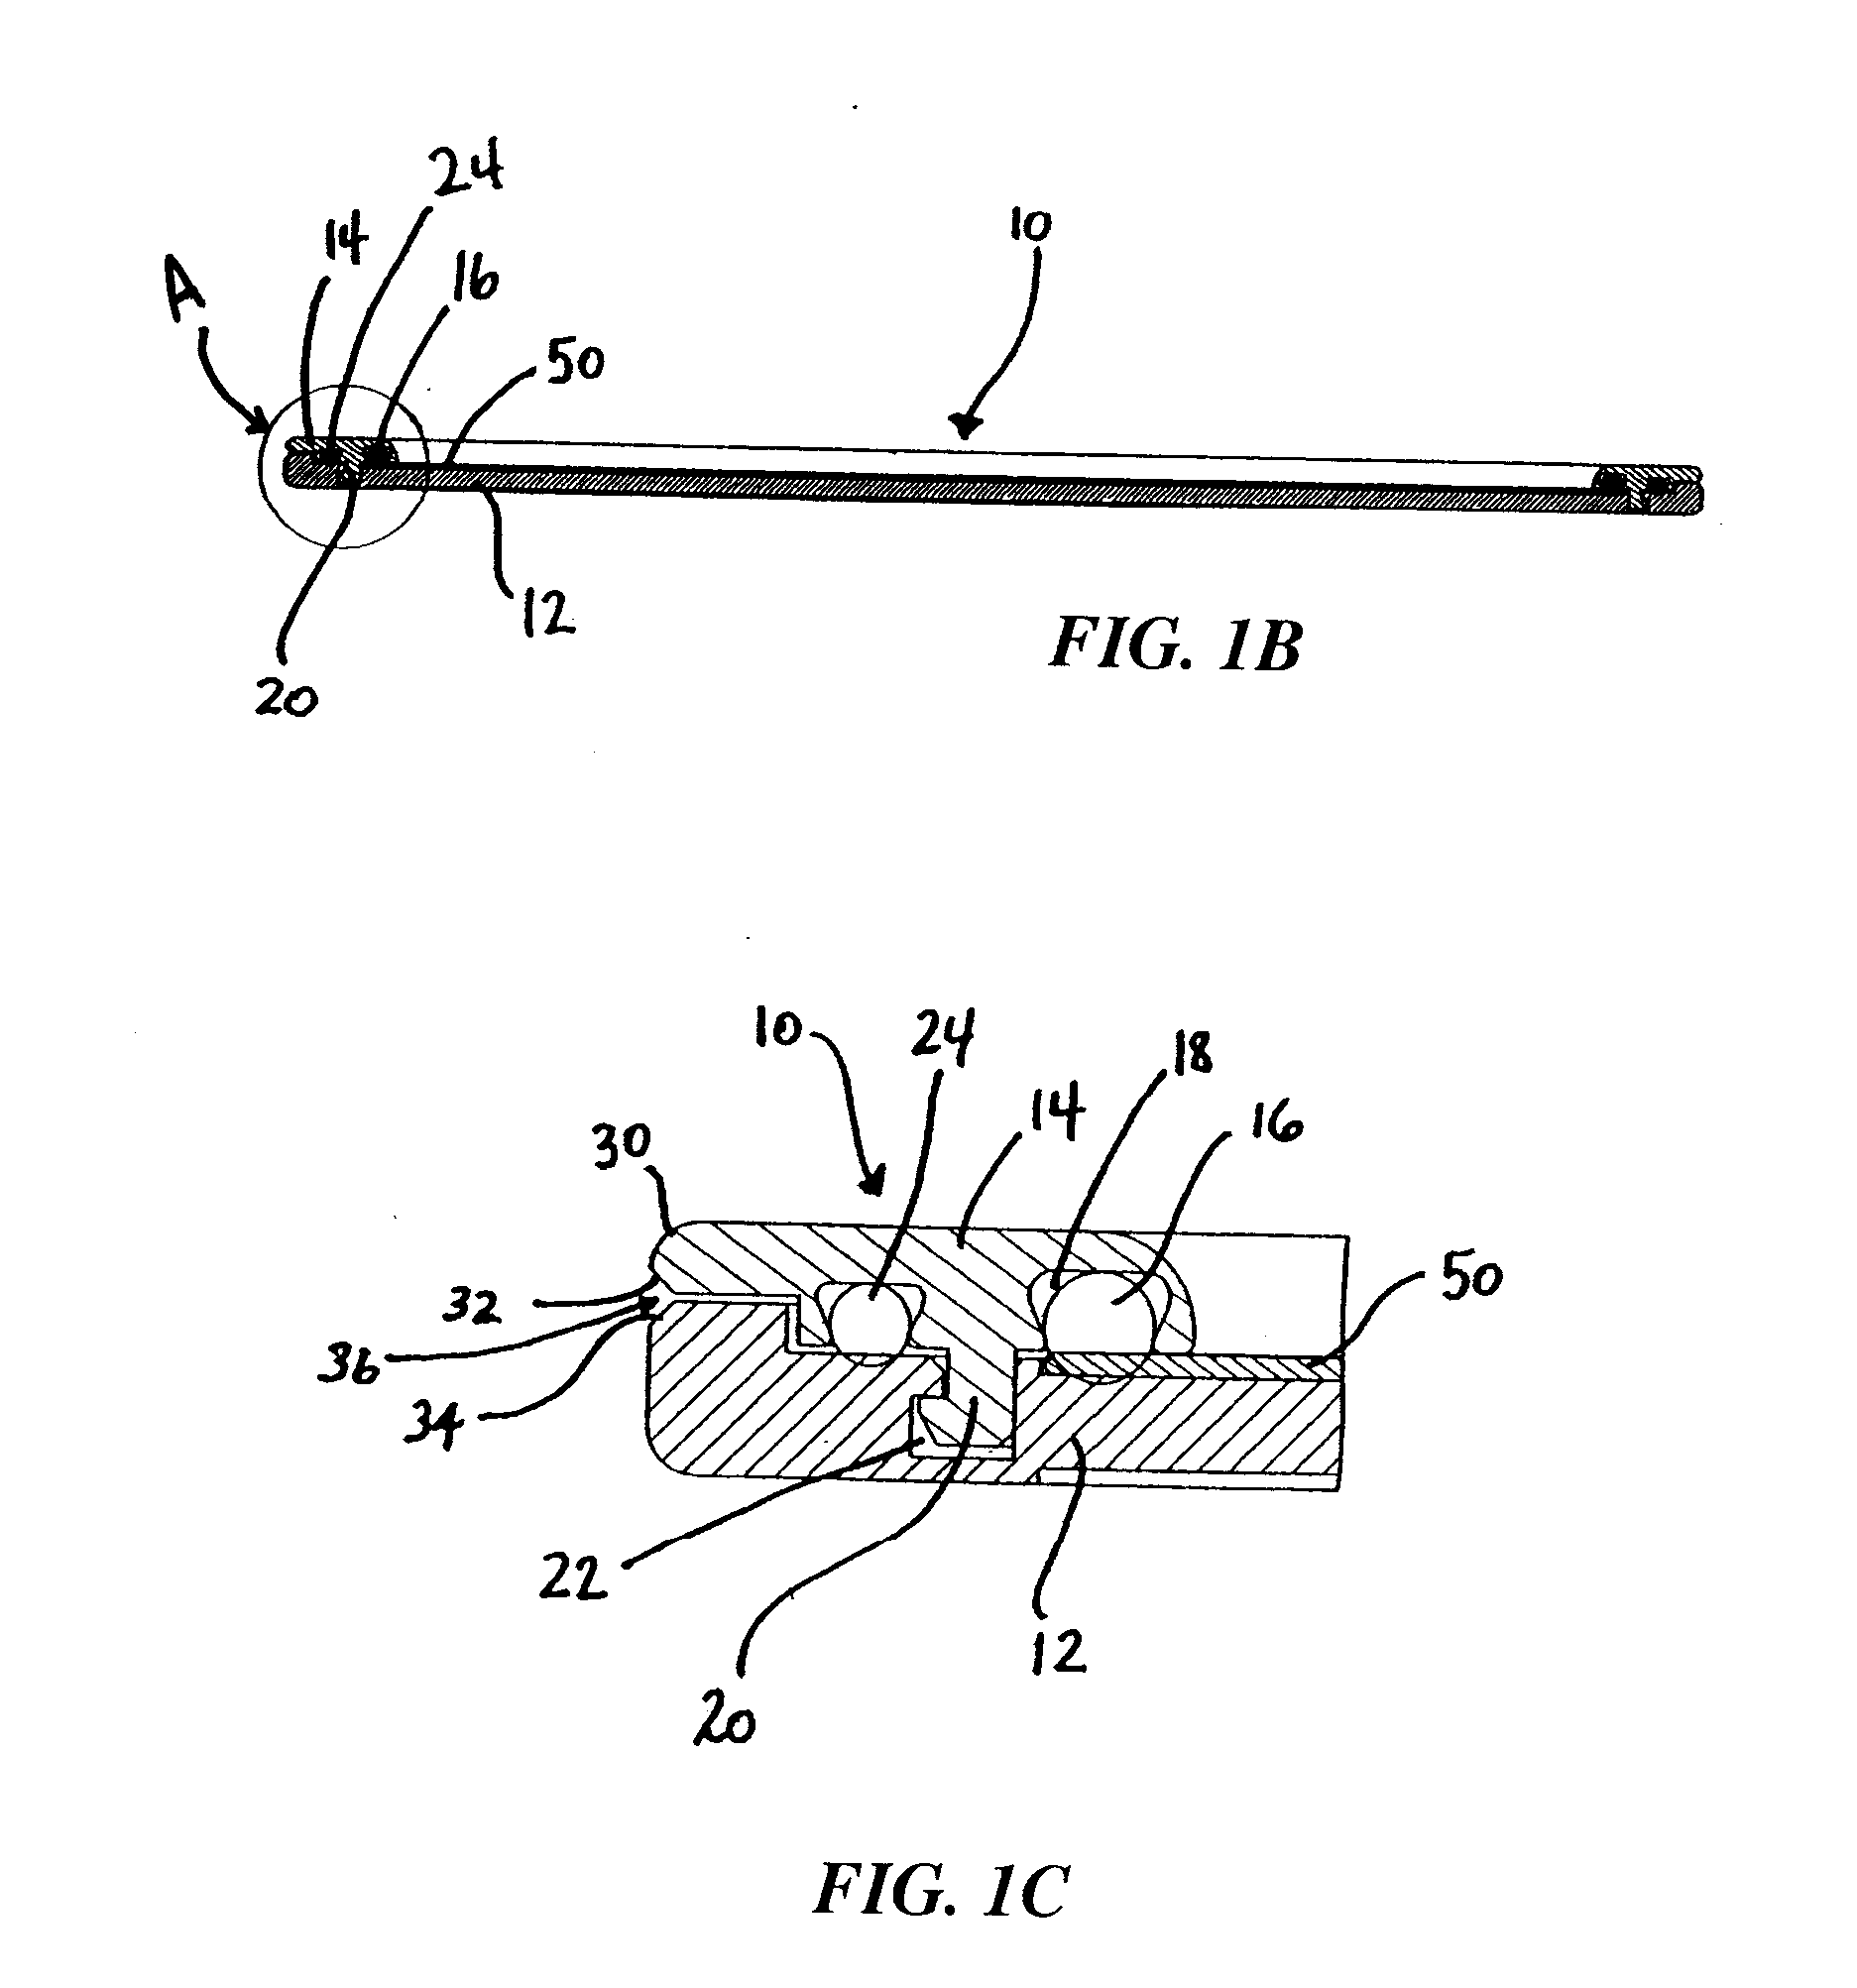 Apparatus for use in thinning a semiconductor workpiece